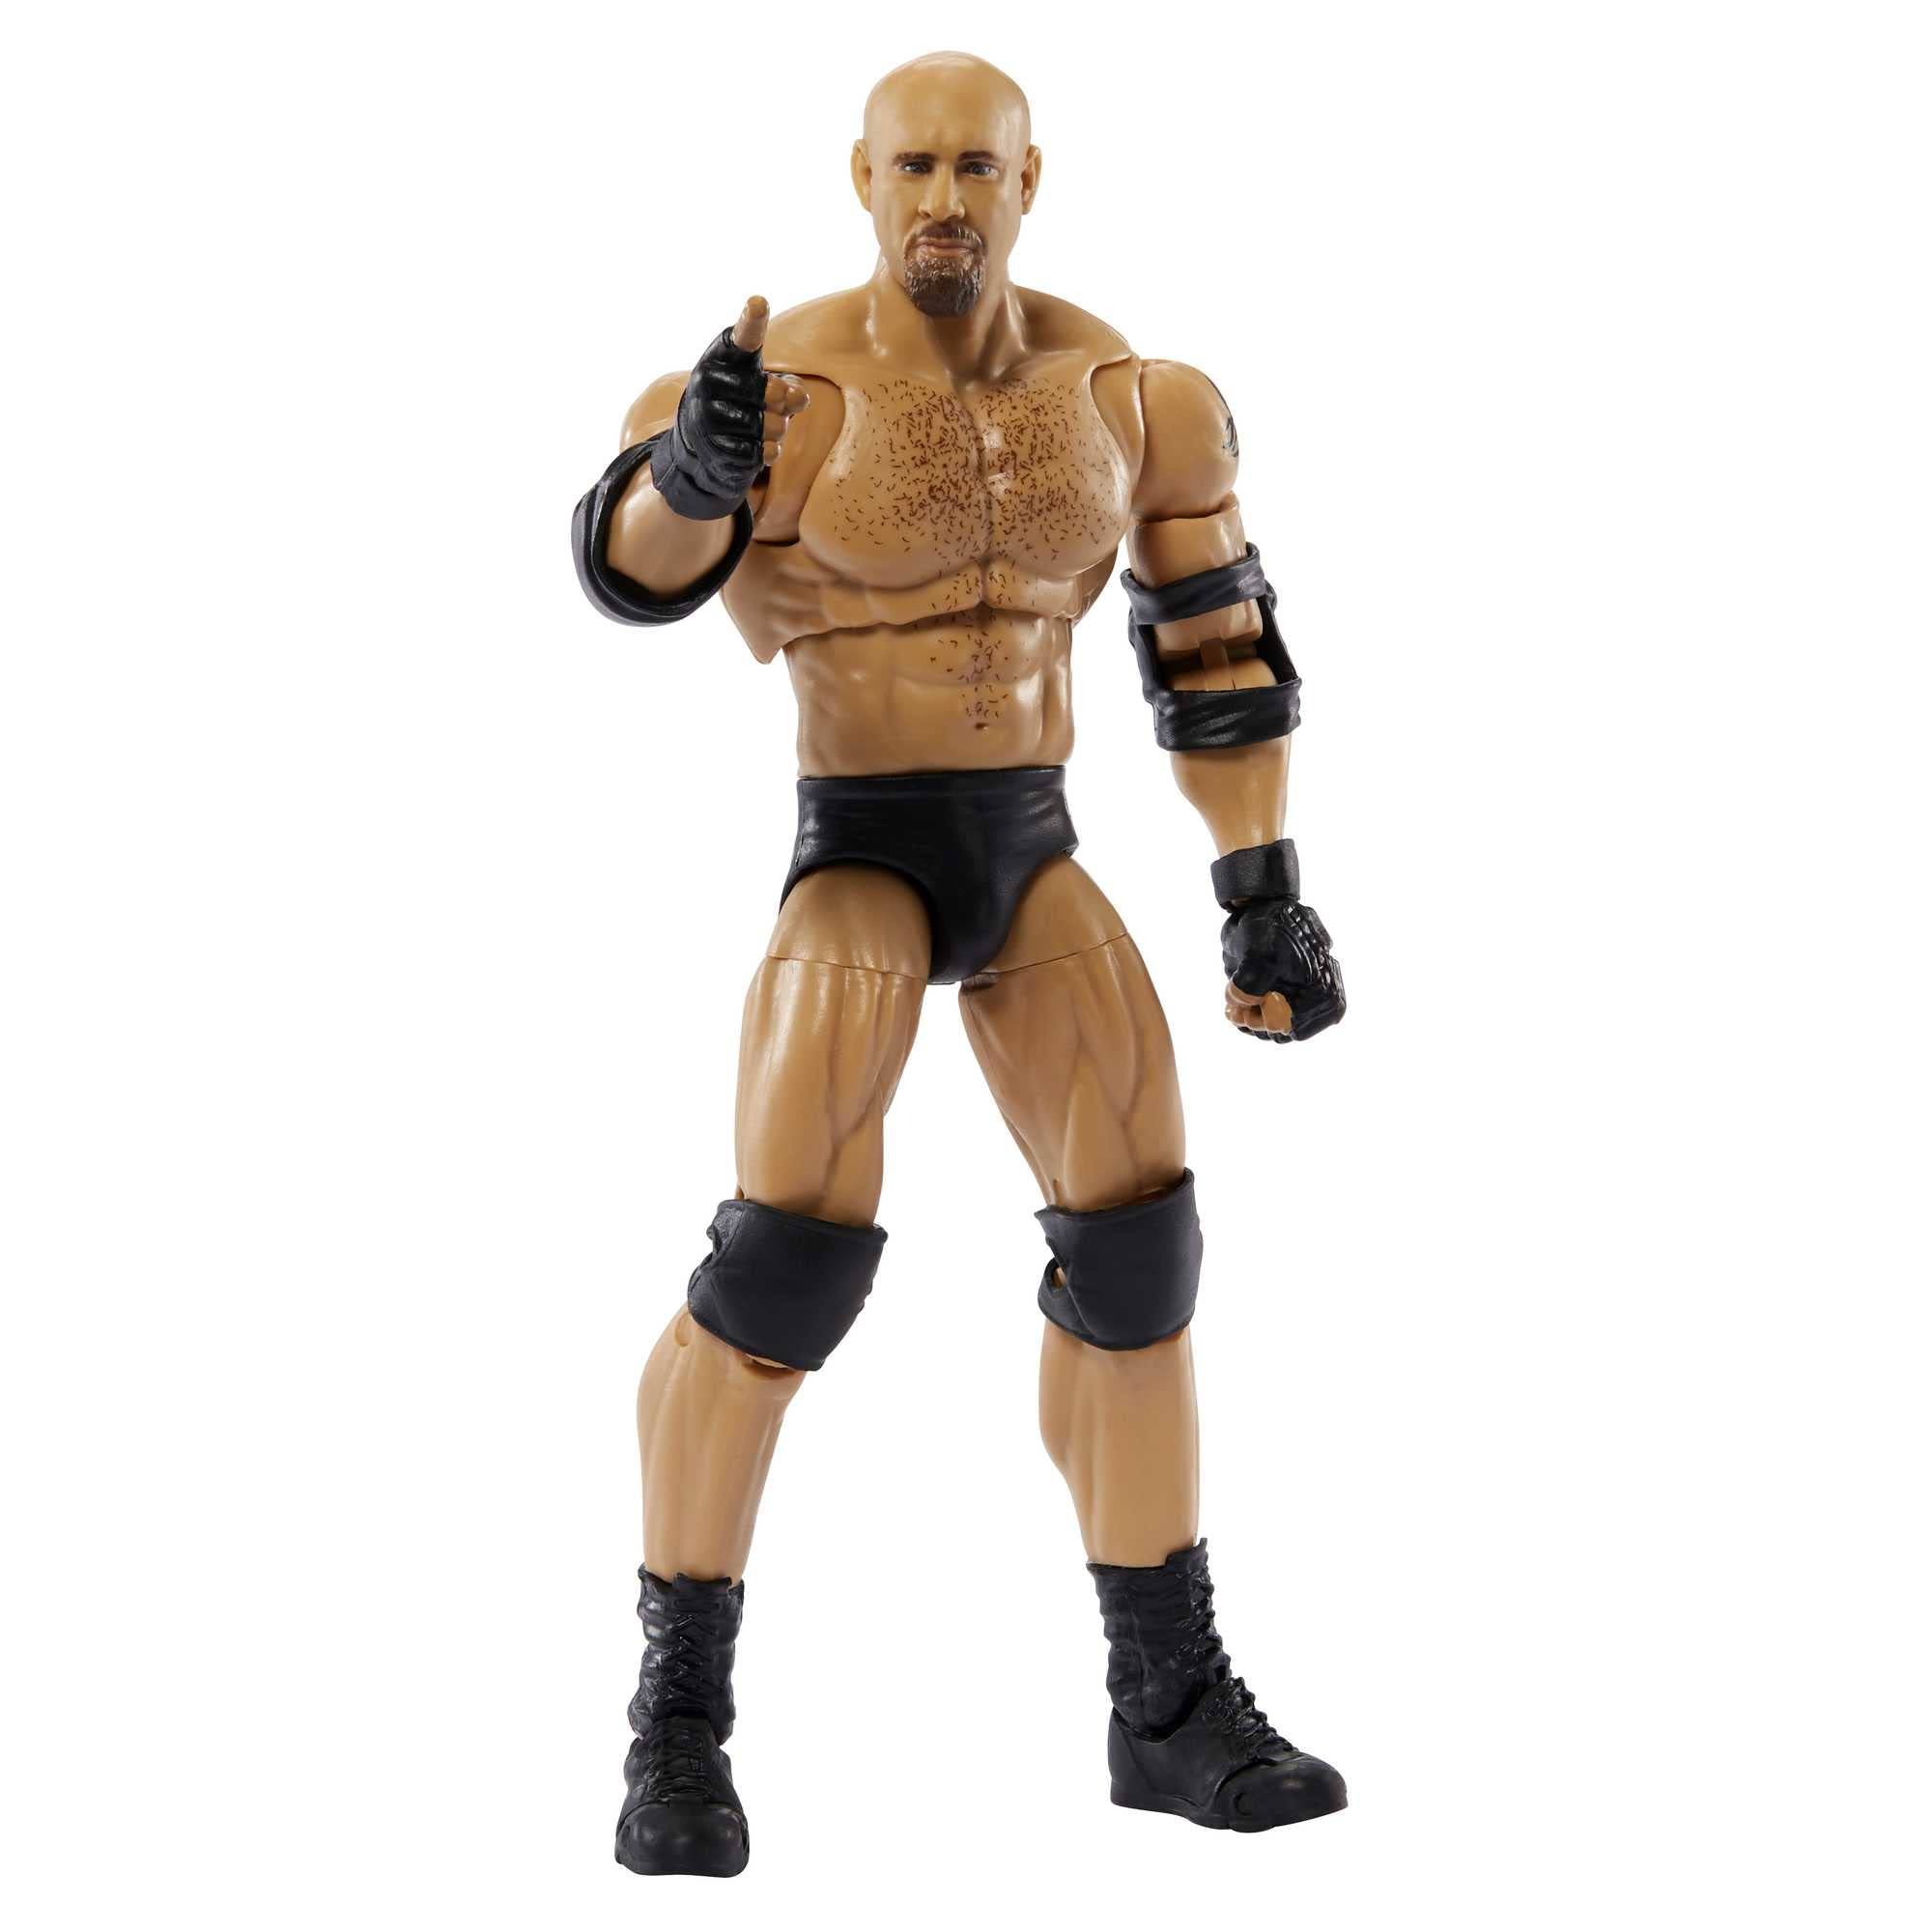 Mattel WWE Goldberg Ultimate Edition Fan Takeover Action Figure with Articulation, Life-Like Detail & Accessories, 6-Inch